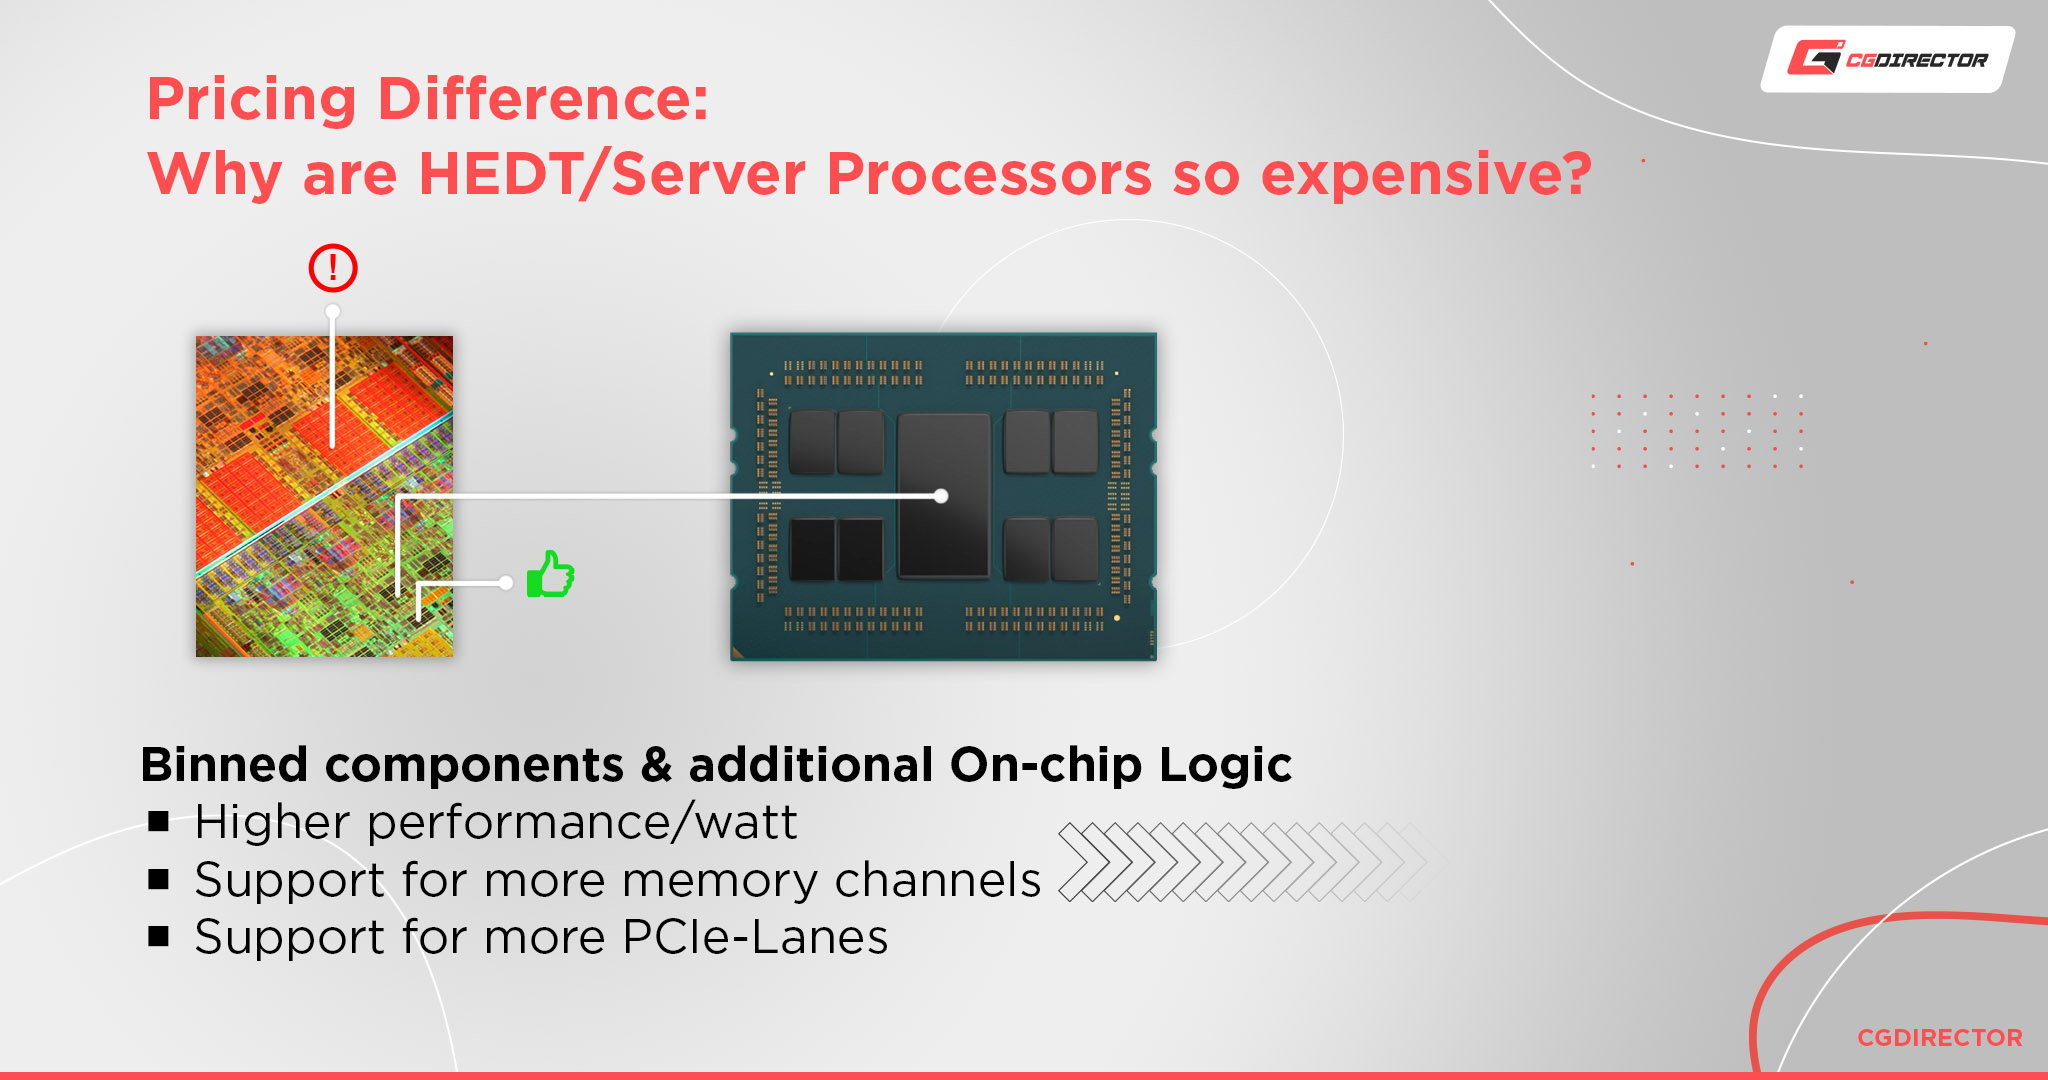 Pricing Difference - HEDT processors